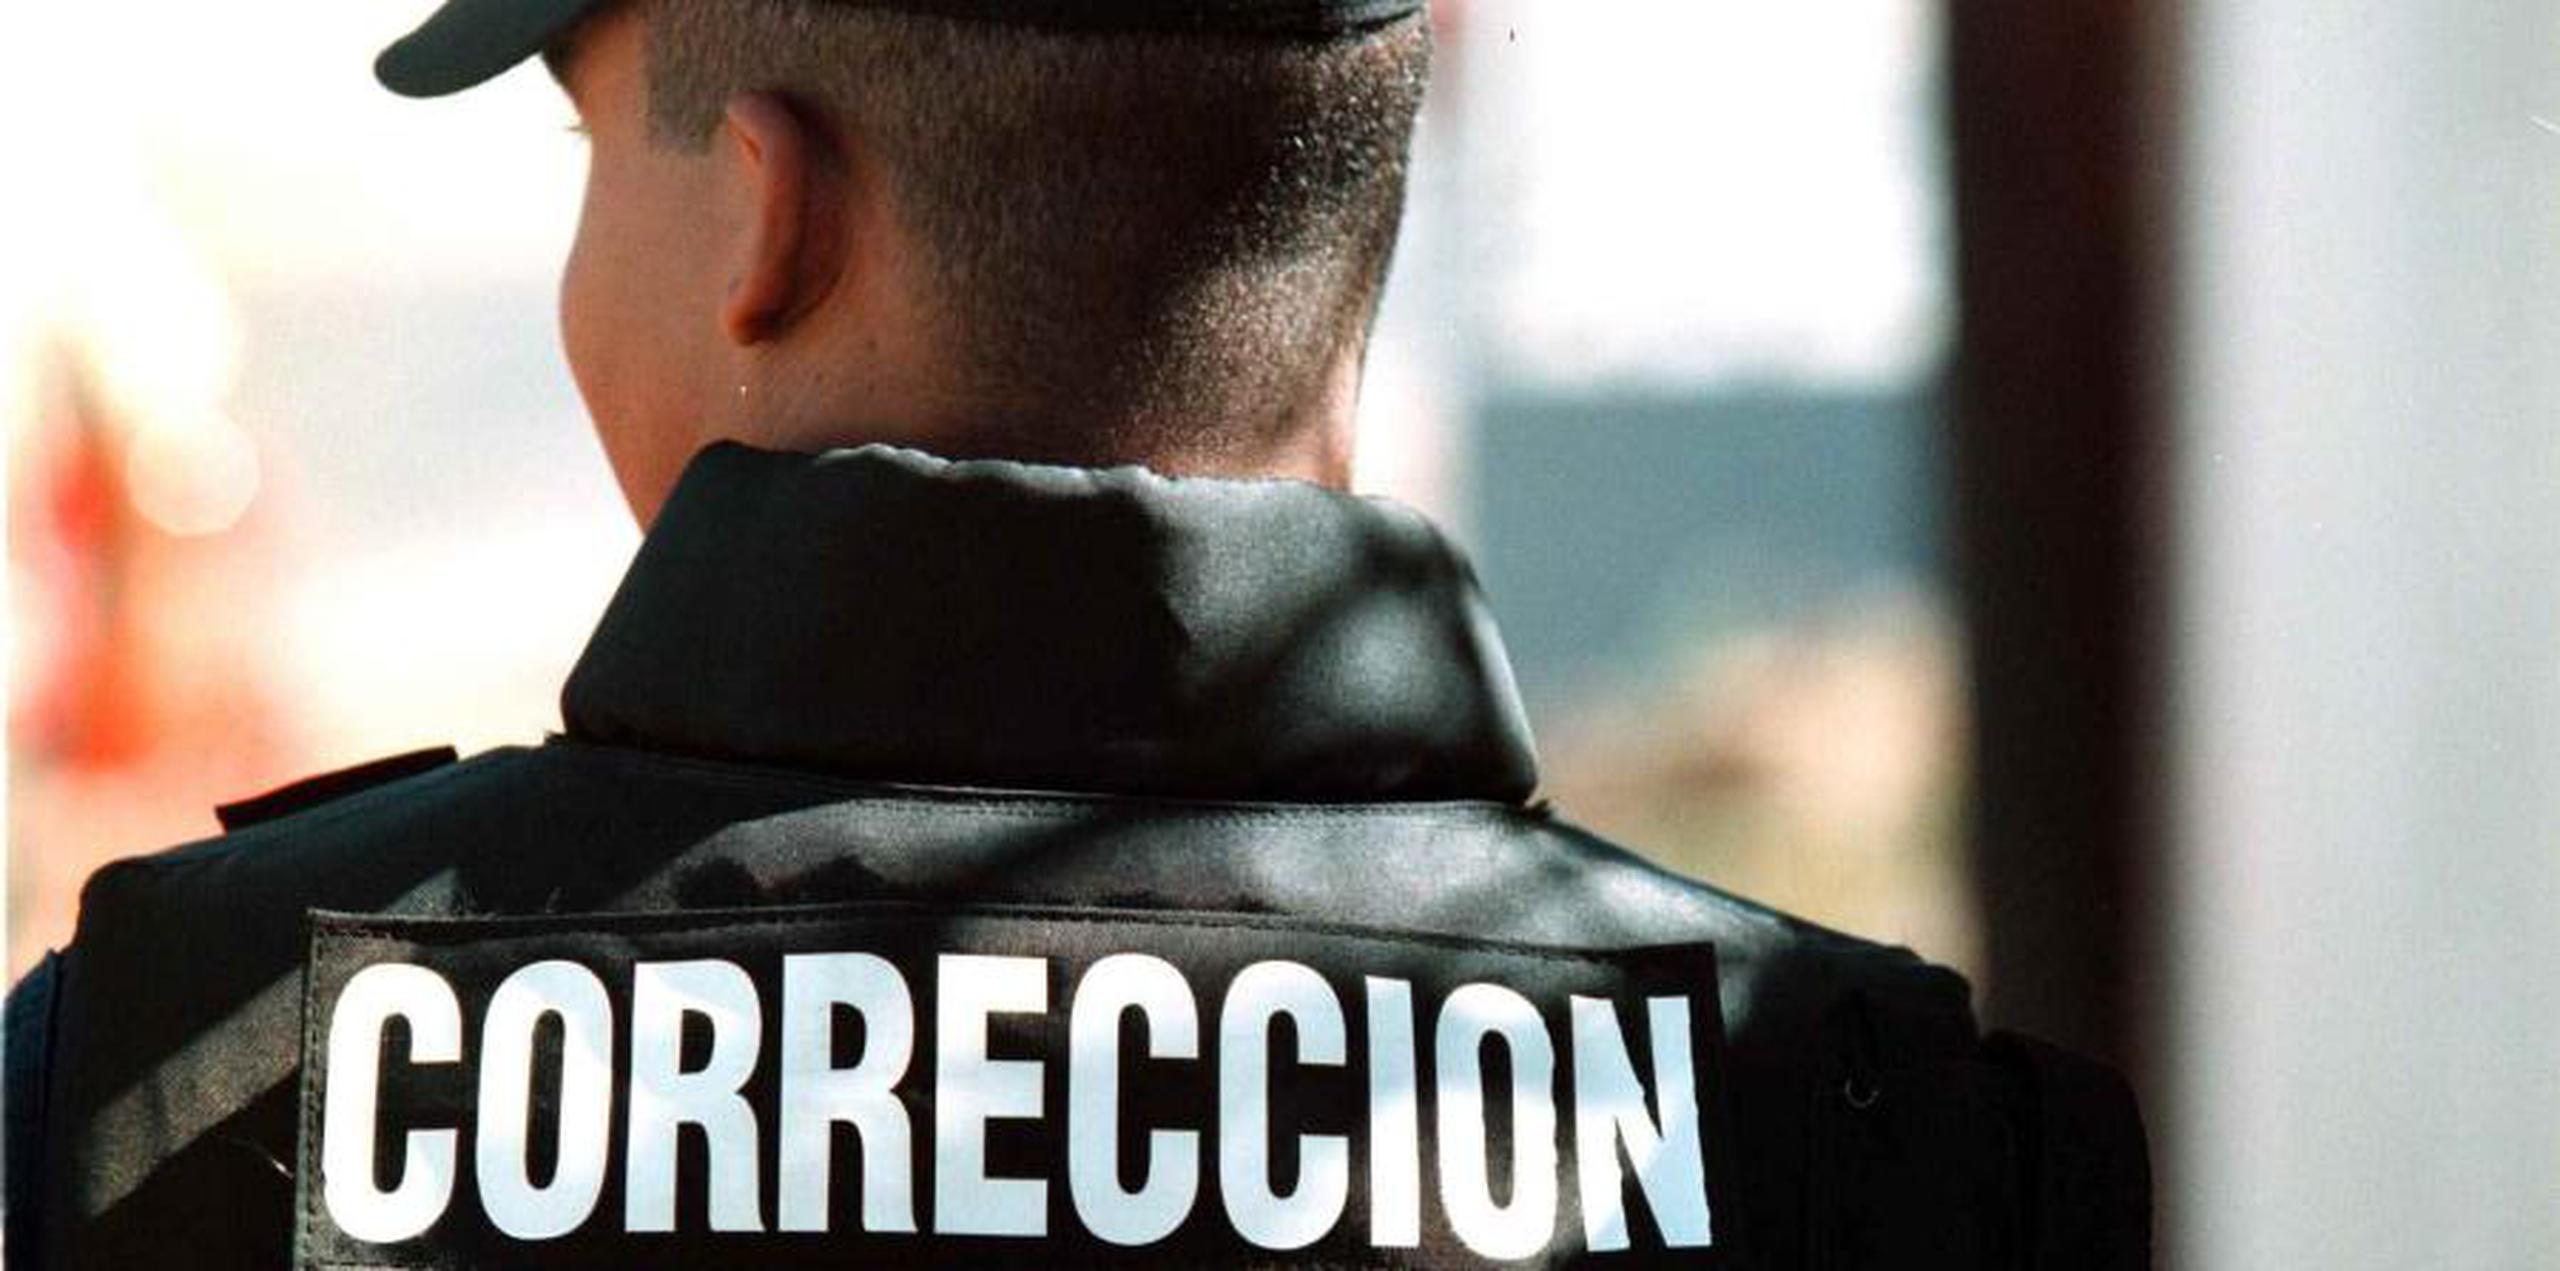 Observers point to the reduced number of convictions for a series of offenses, which could be related to the decrease. (Archivo / GFR Media)